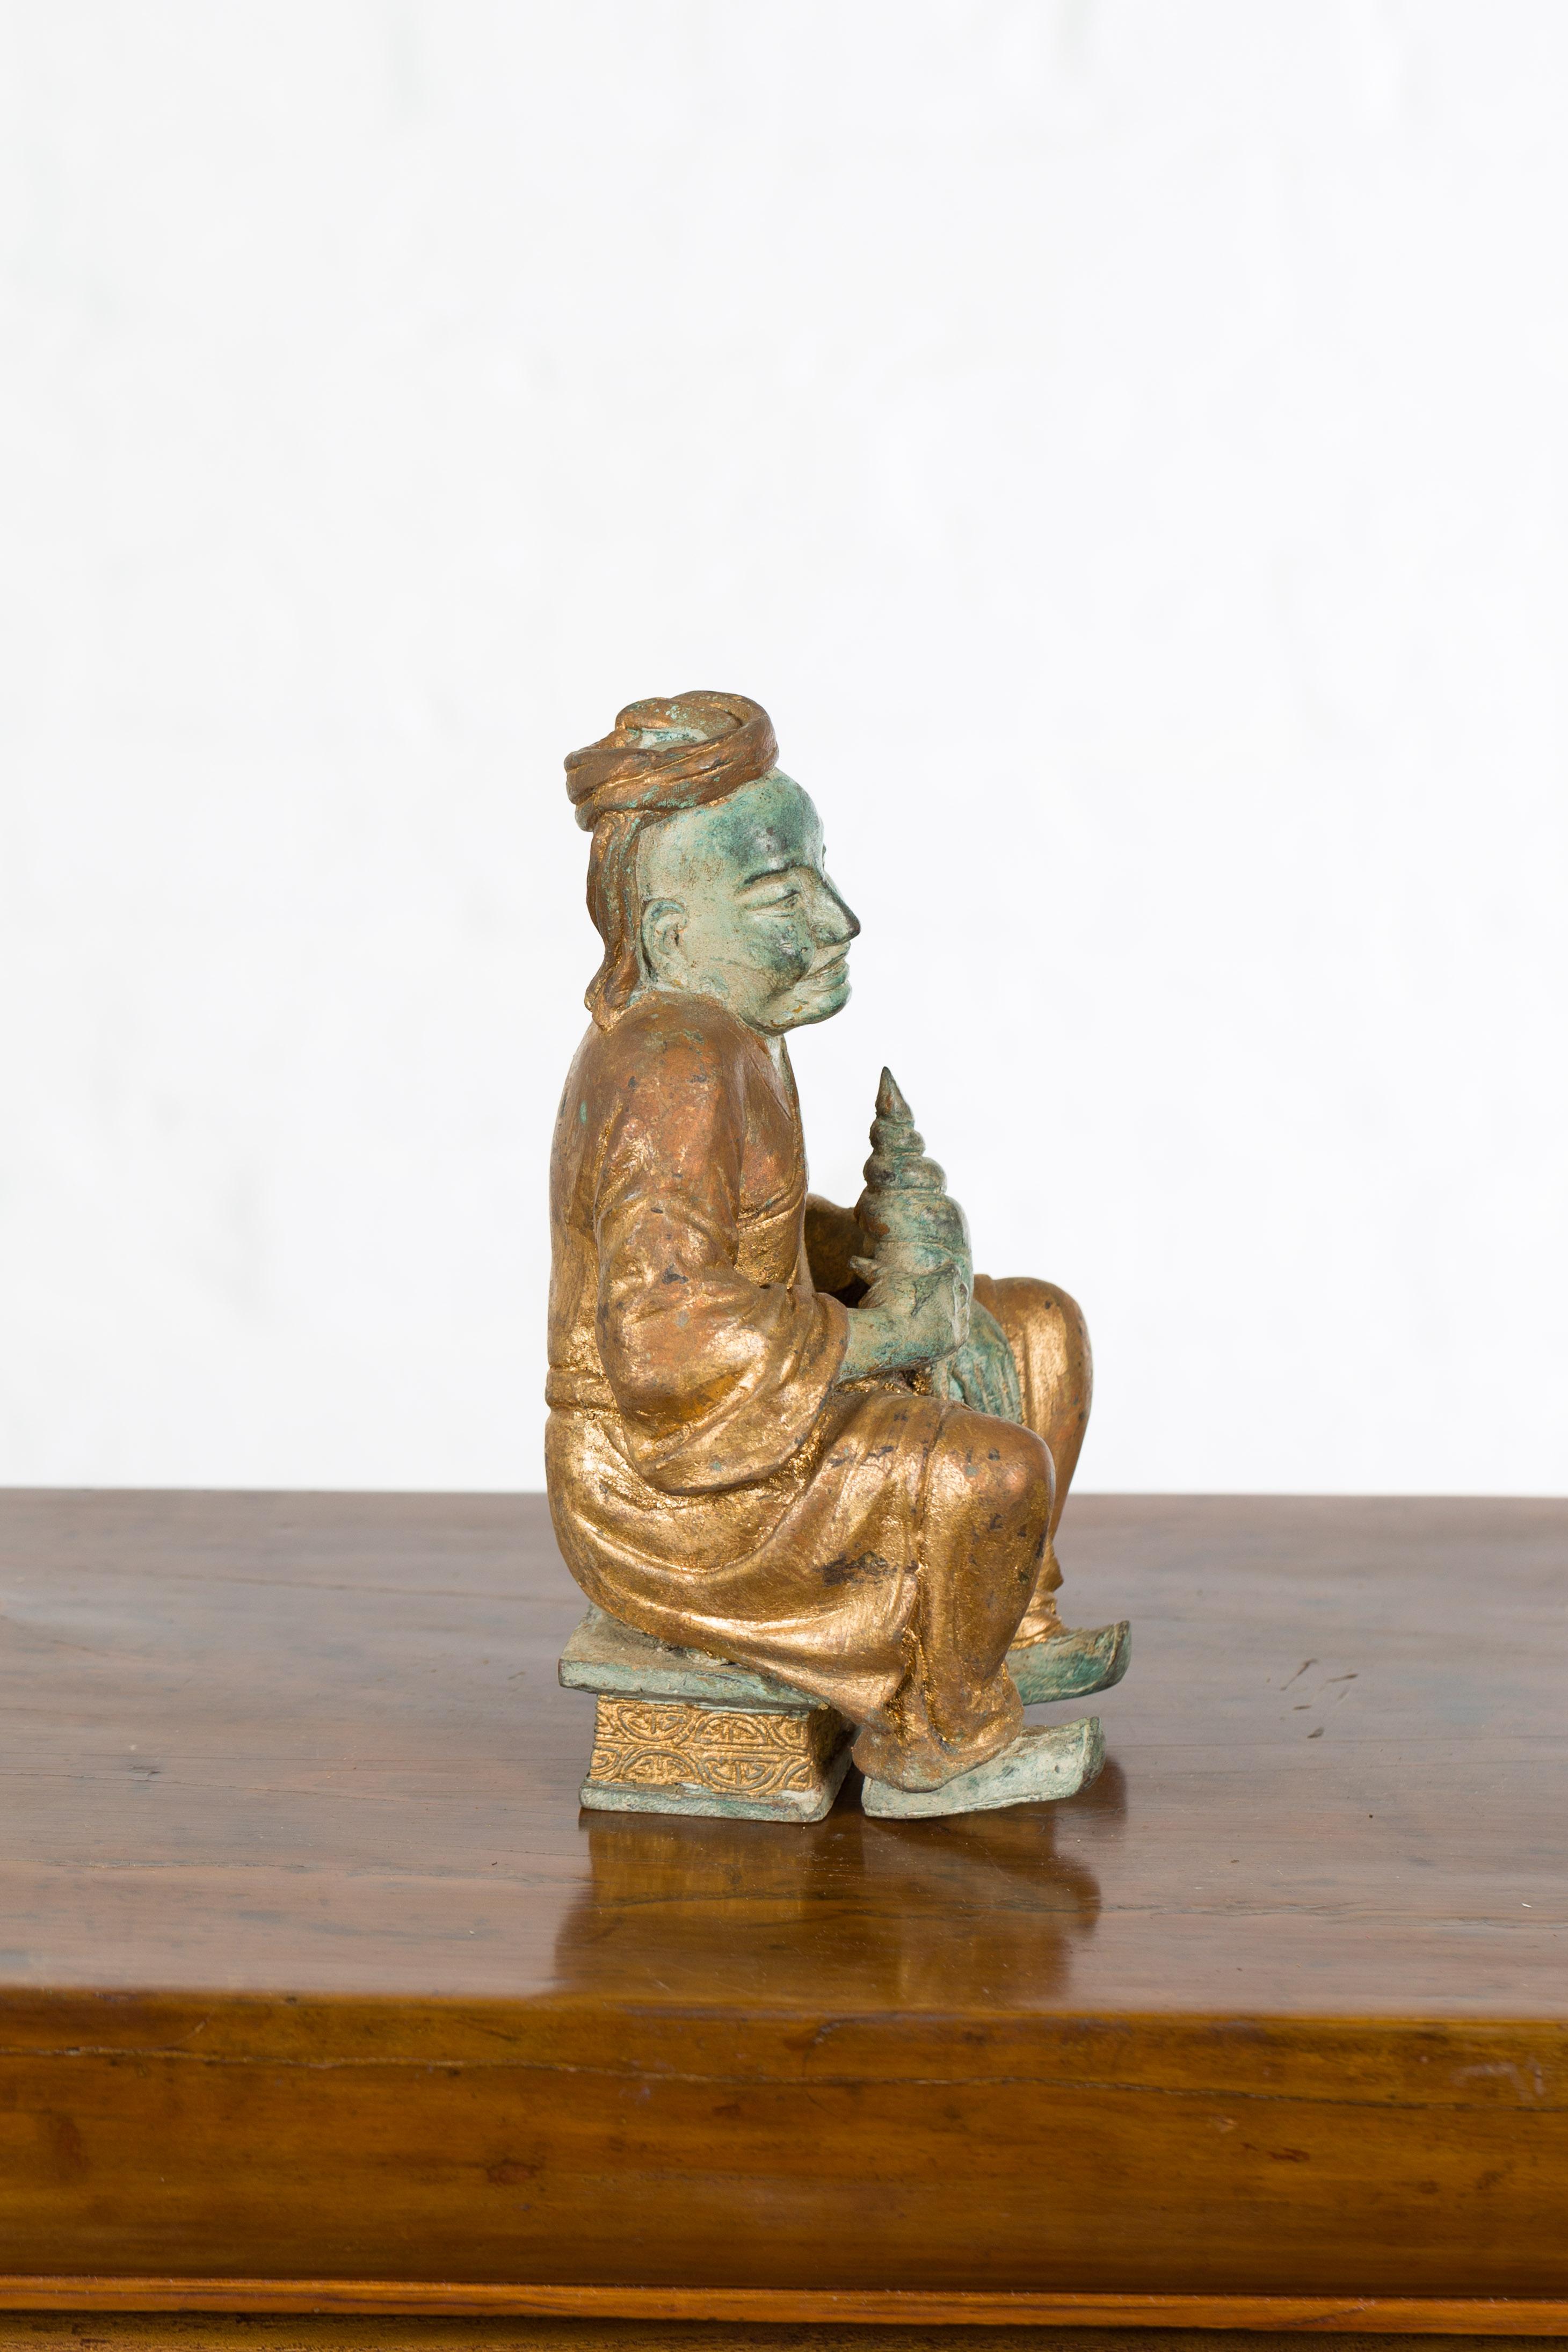 Petite Thai Verde and Gilded Statuette of a Seated Monk Holding a Conch Shell 2